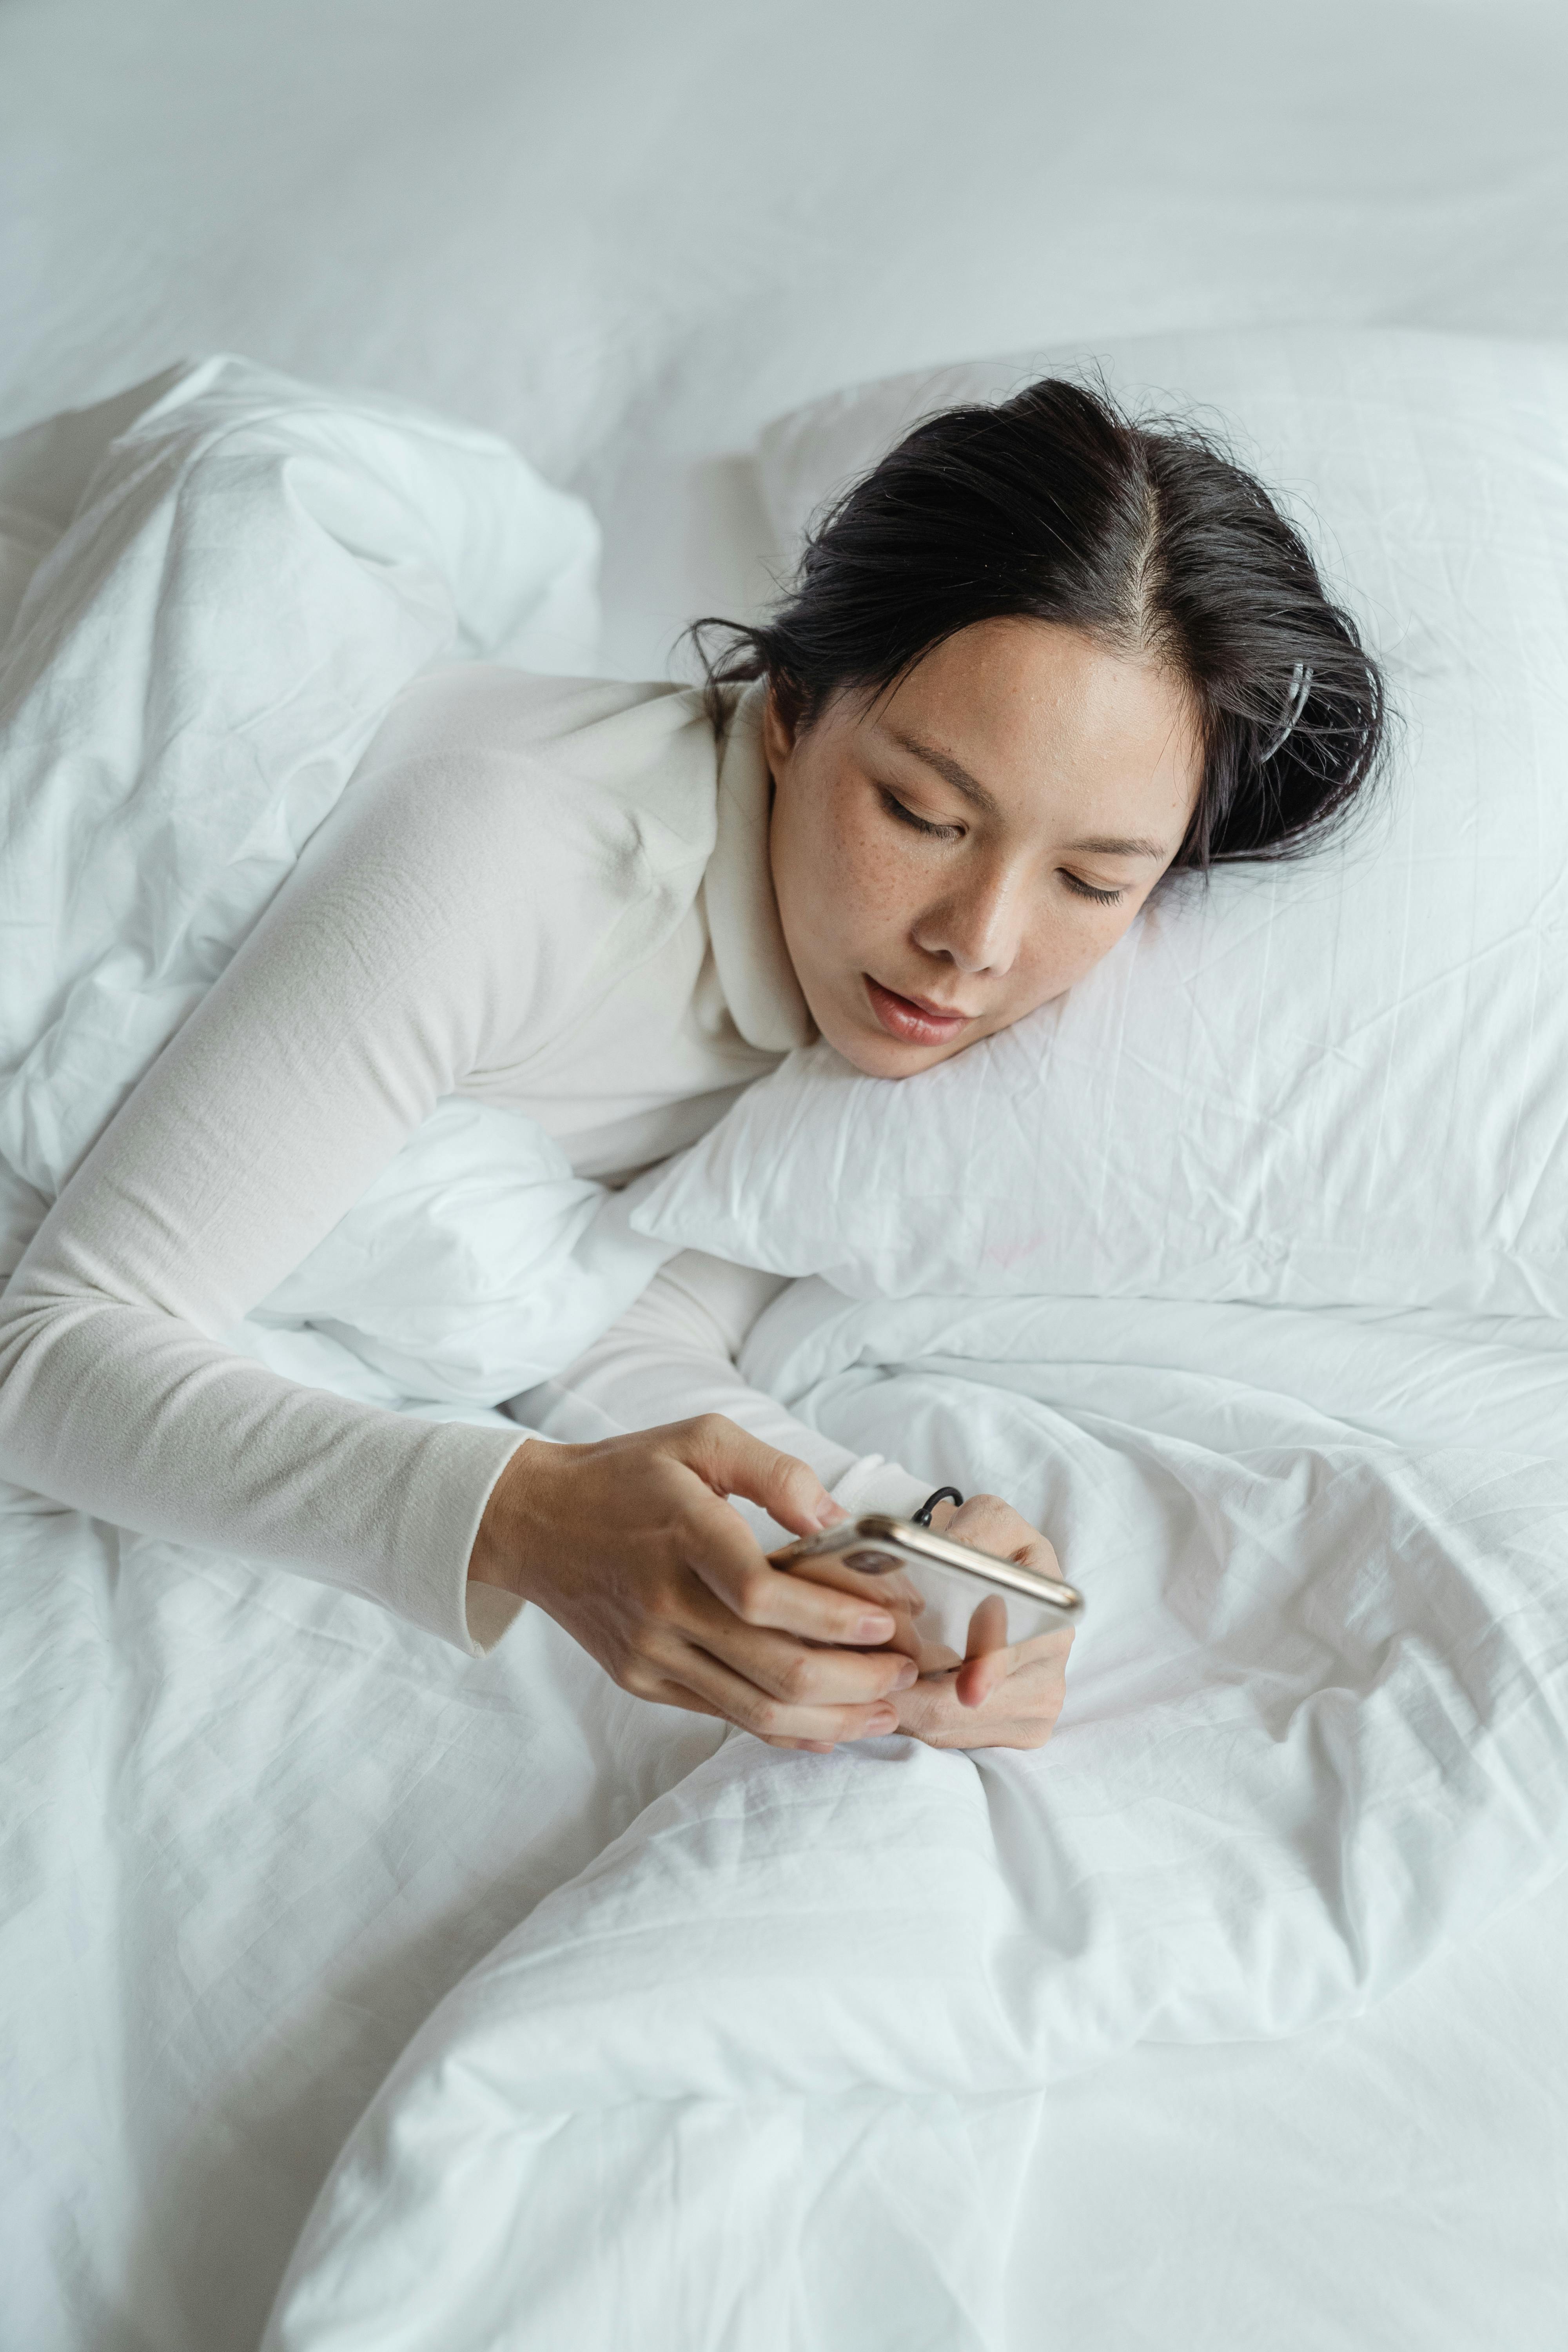 A woman texting on her phone while lying in bed | Source: Pexels